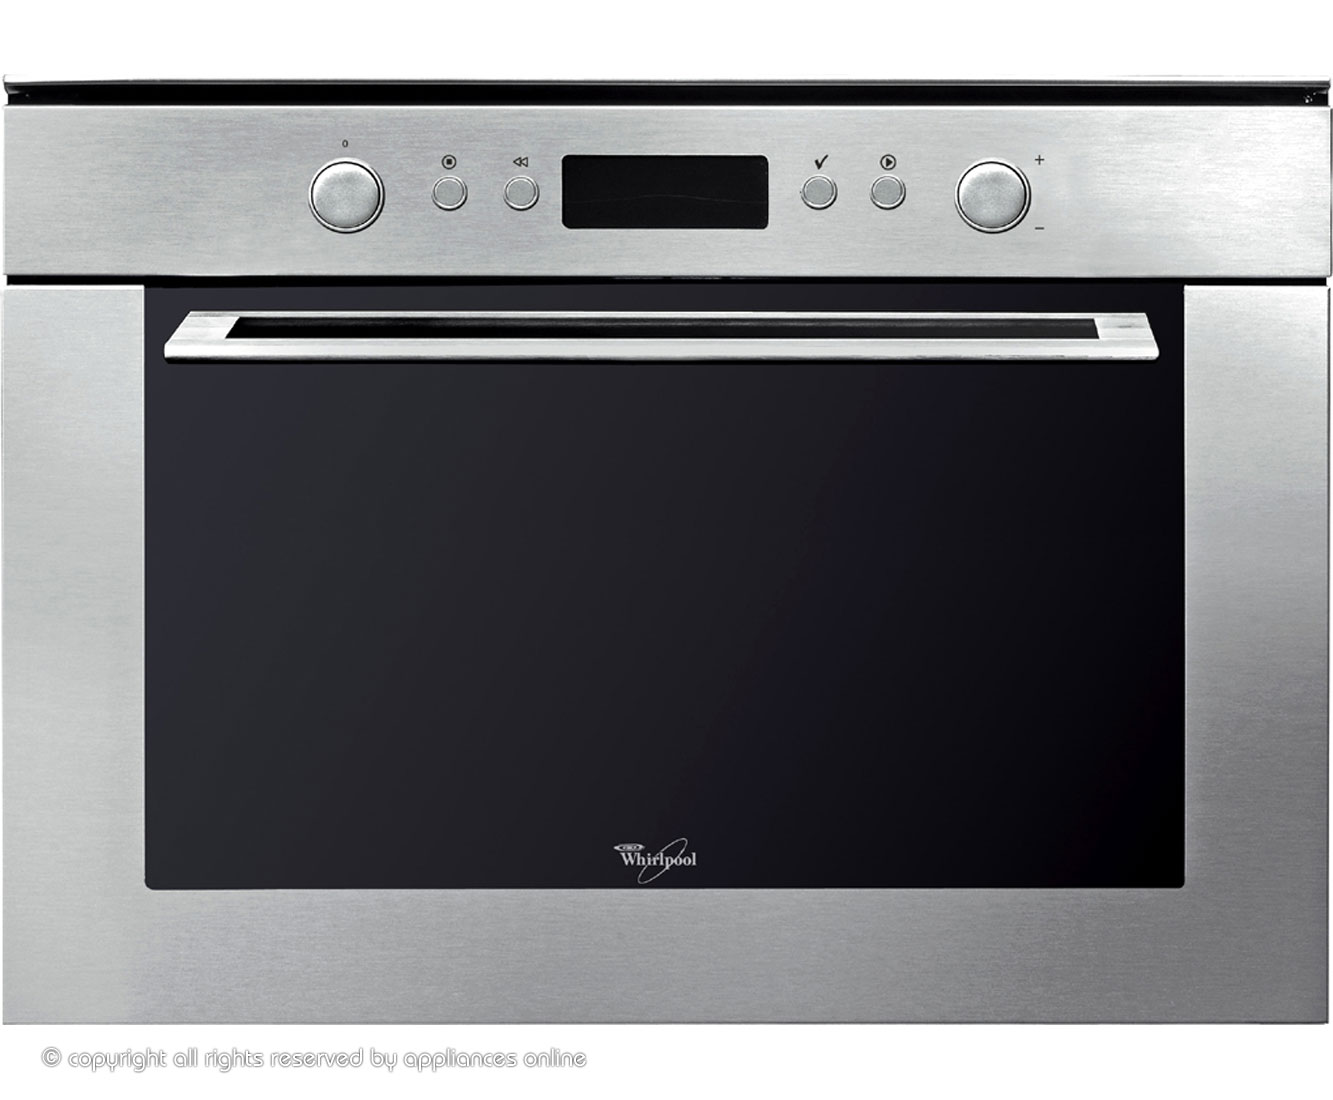 Whirlpool AMW820/IX Built In Microwave With Grill Review